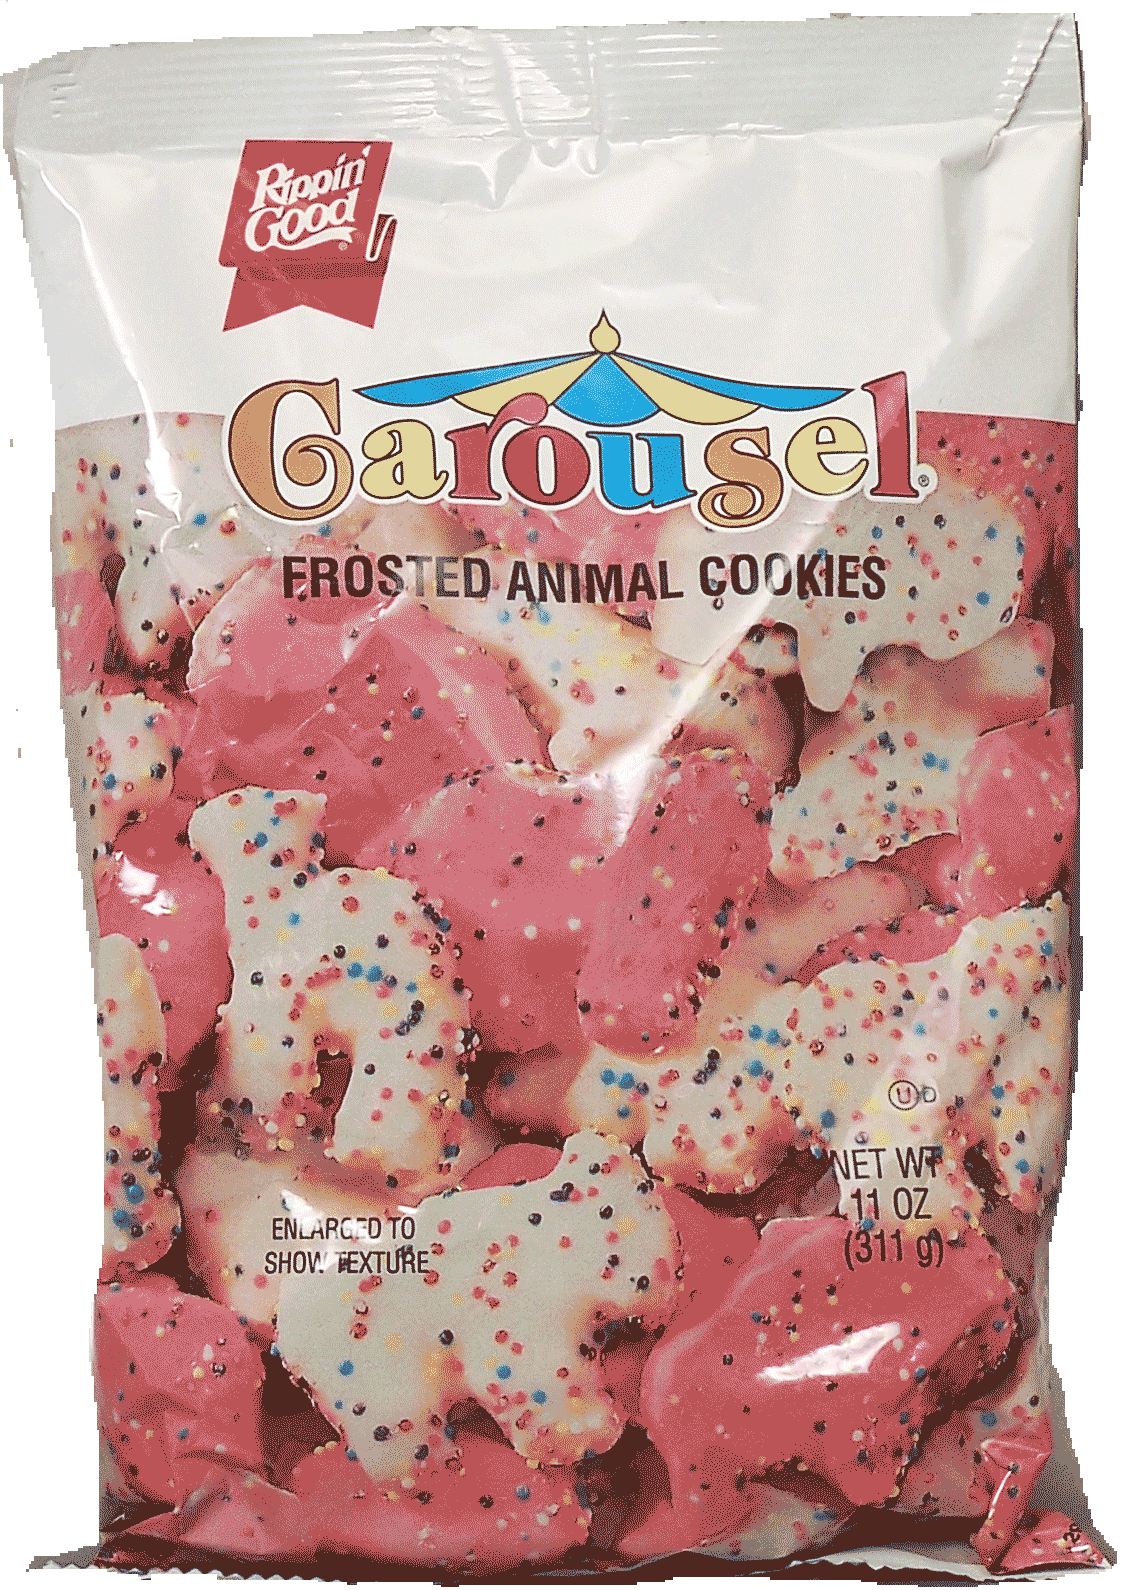 Rippin Good Carousel frosted animal cookies Full-Size Picture